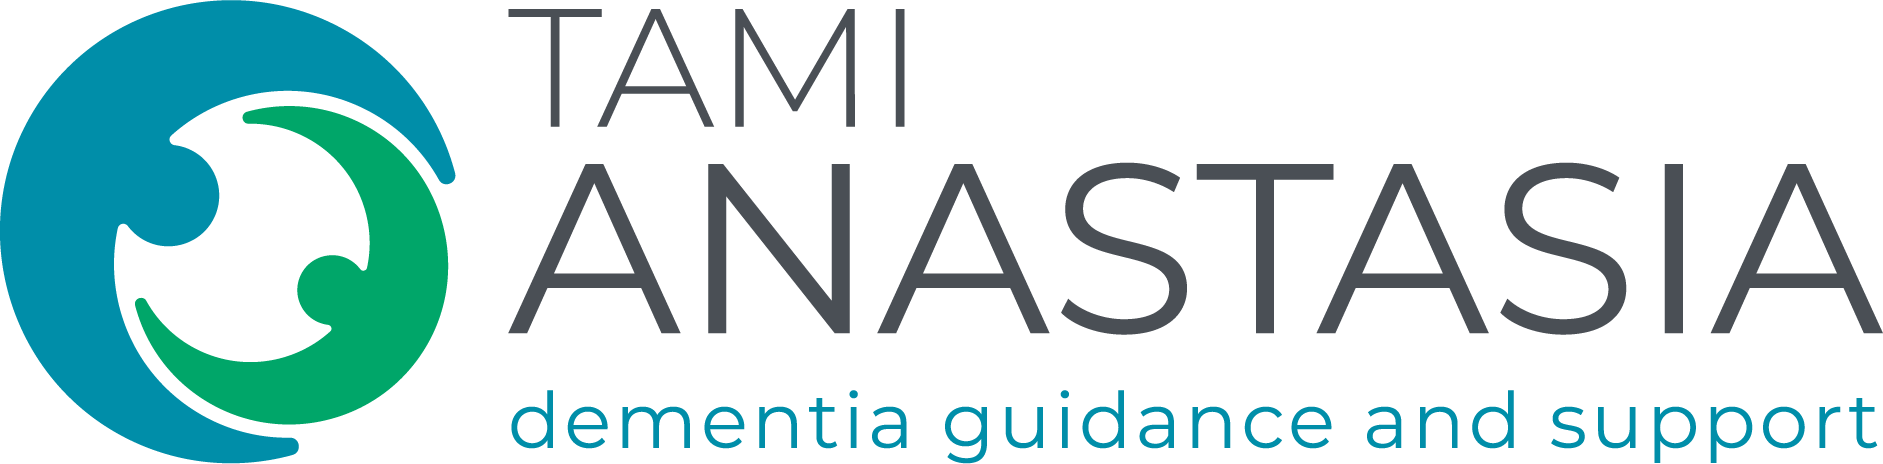 Dementia Guidance and Support | Tami Anastasia